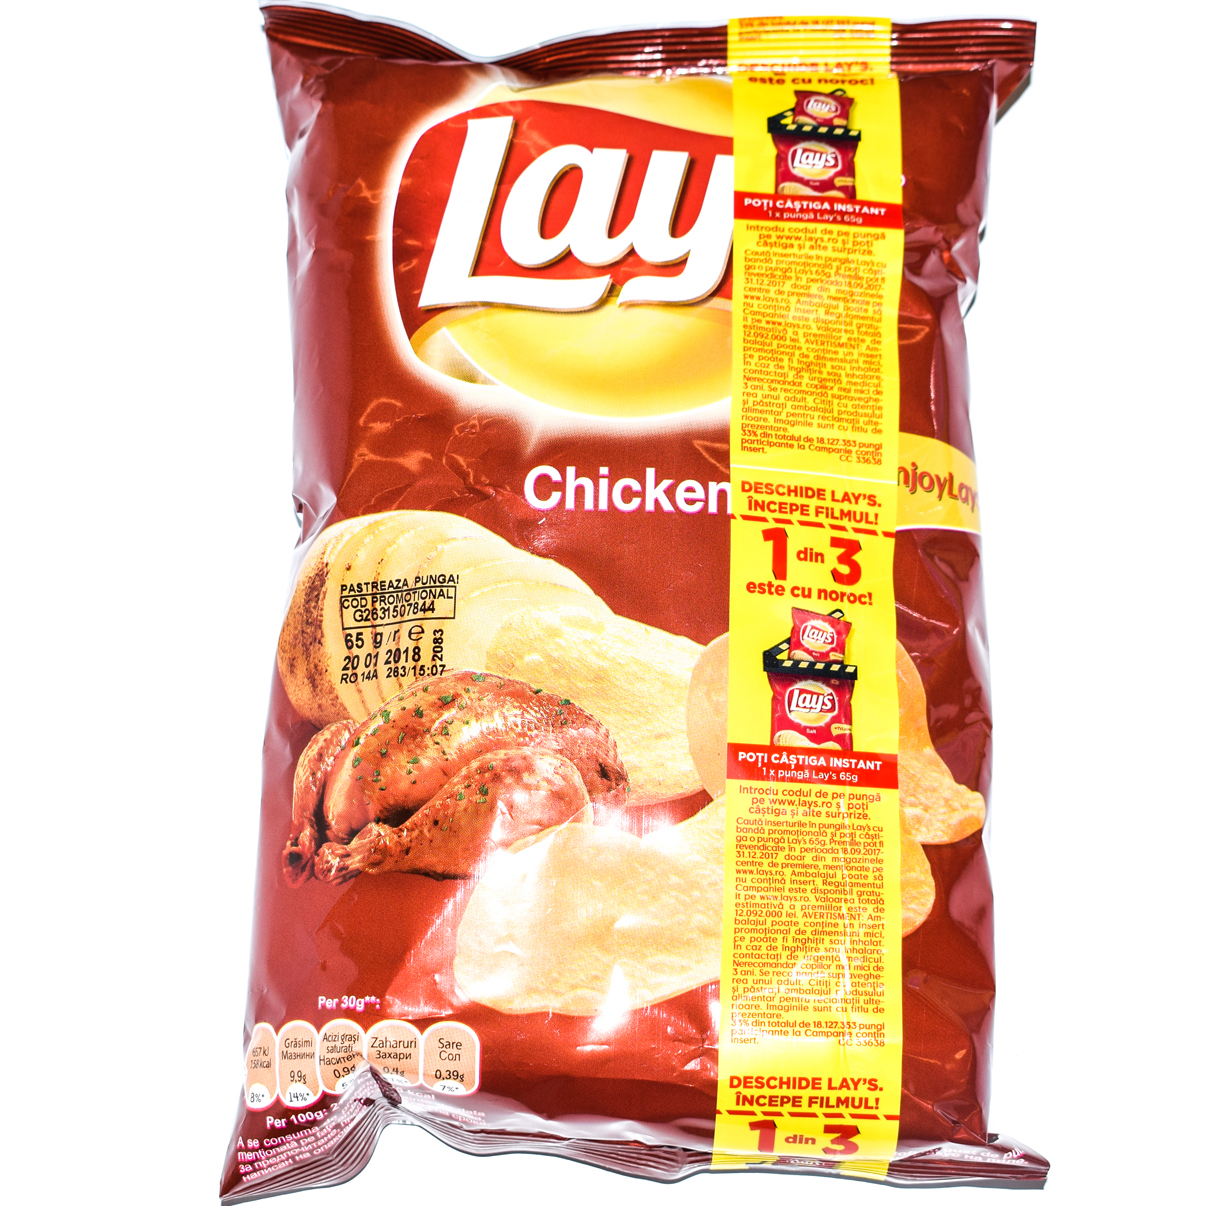 Chips Pui, Lays